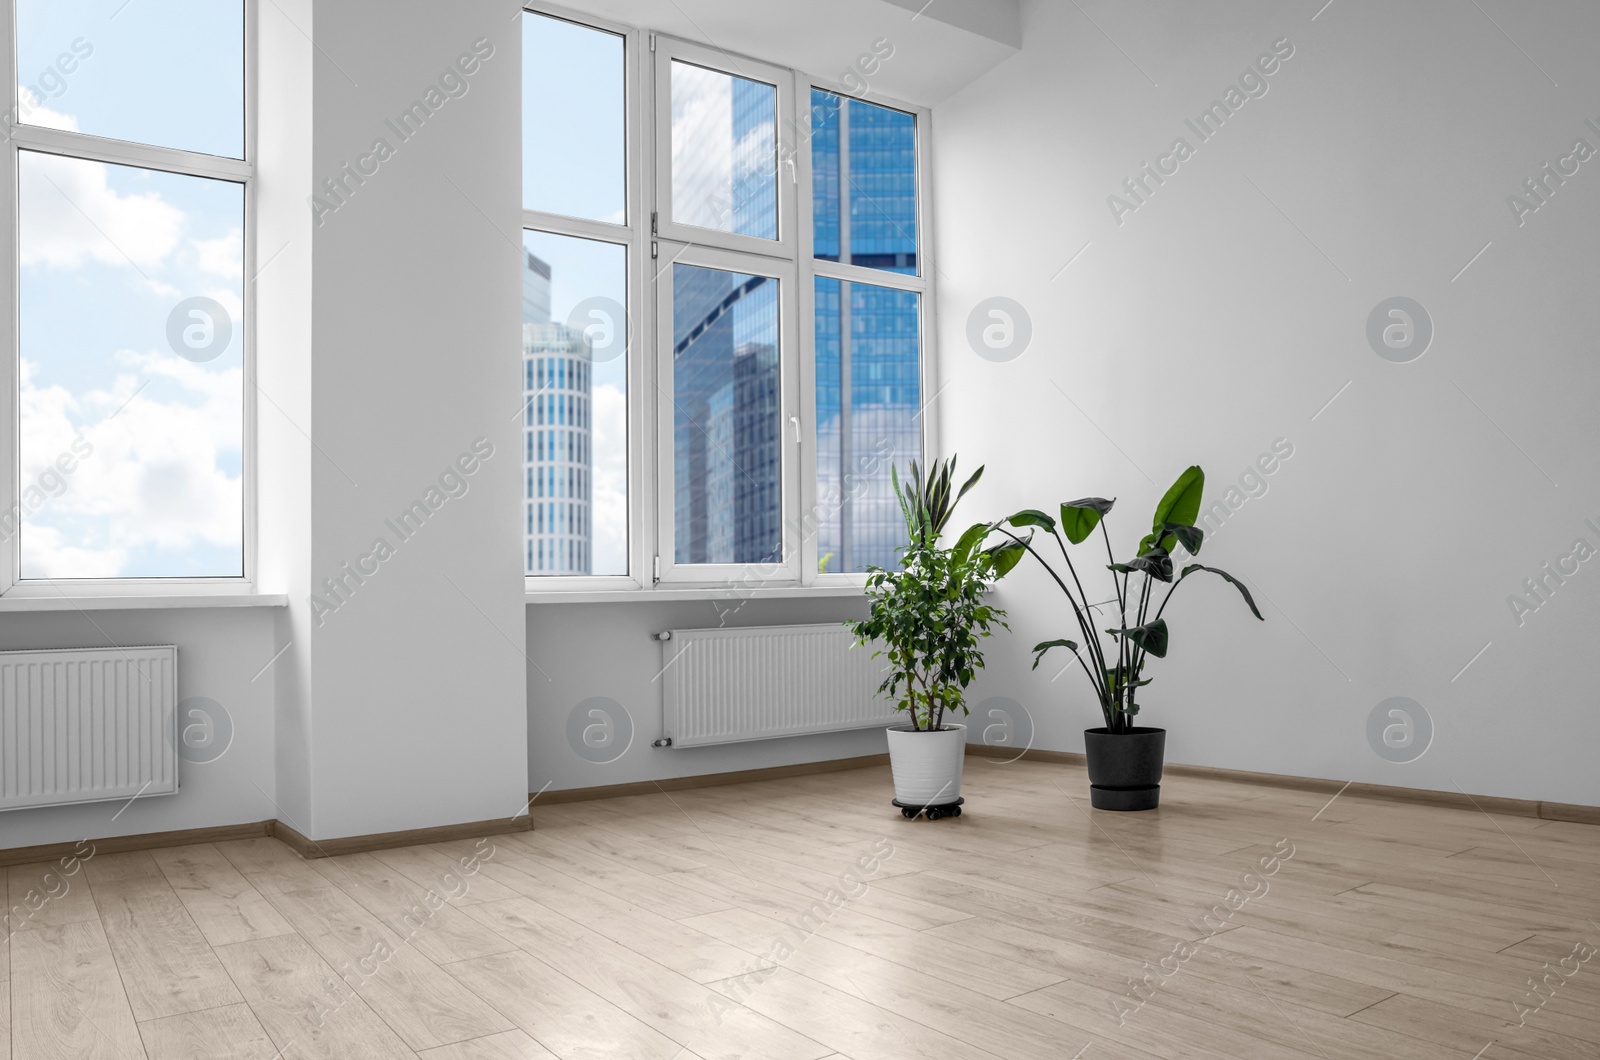 Photo of Empty renovated room with potted houseplants and windows